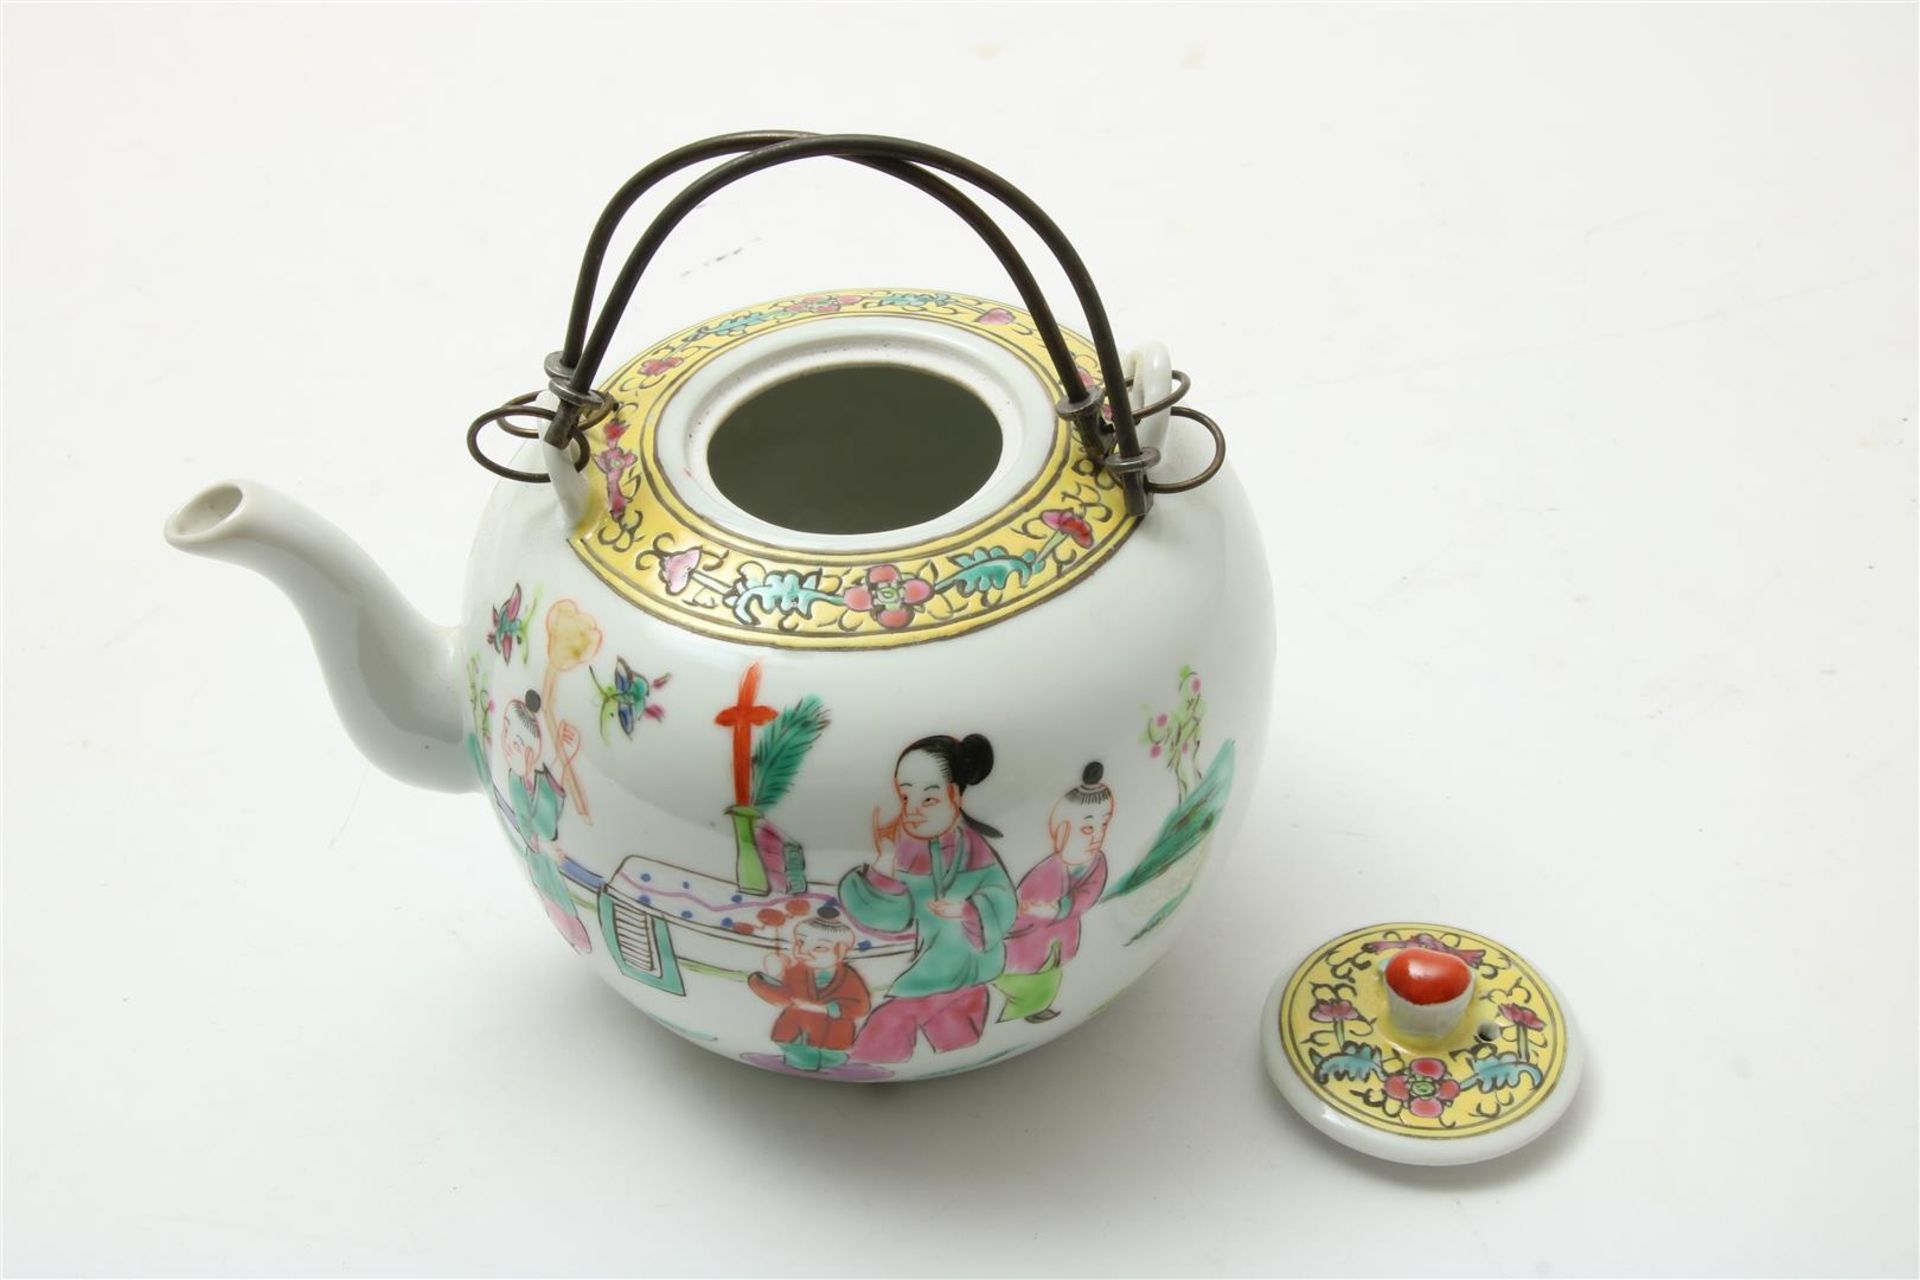 Polychrome porcelain teapot under lid with decoration of moder with children, China 20th century, h.